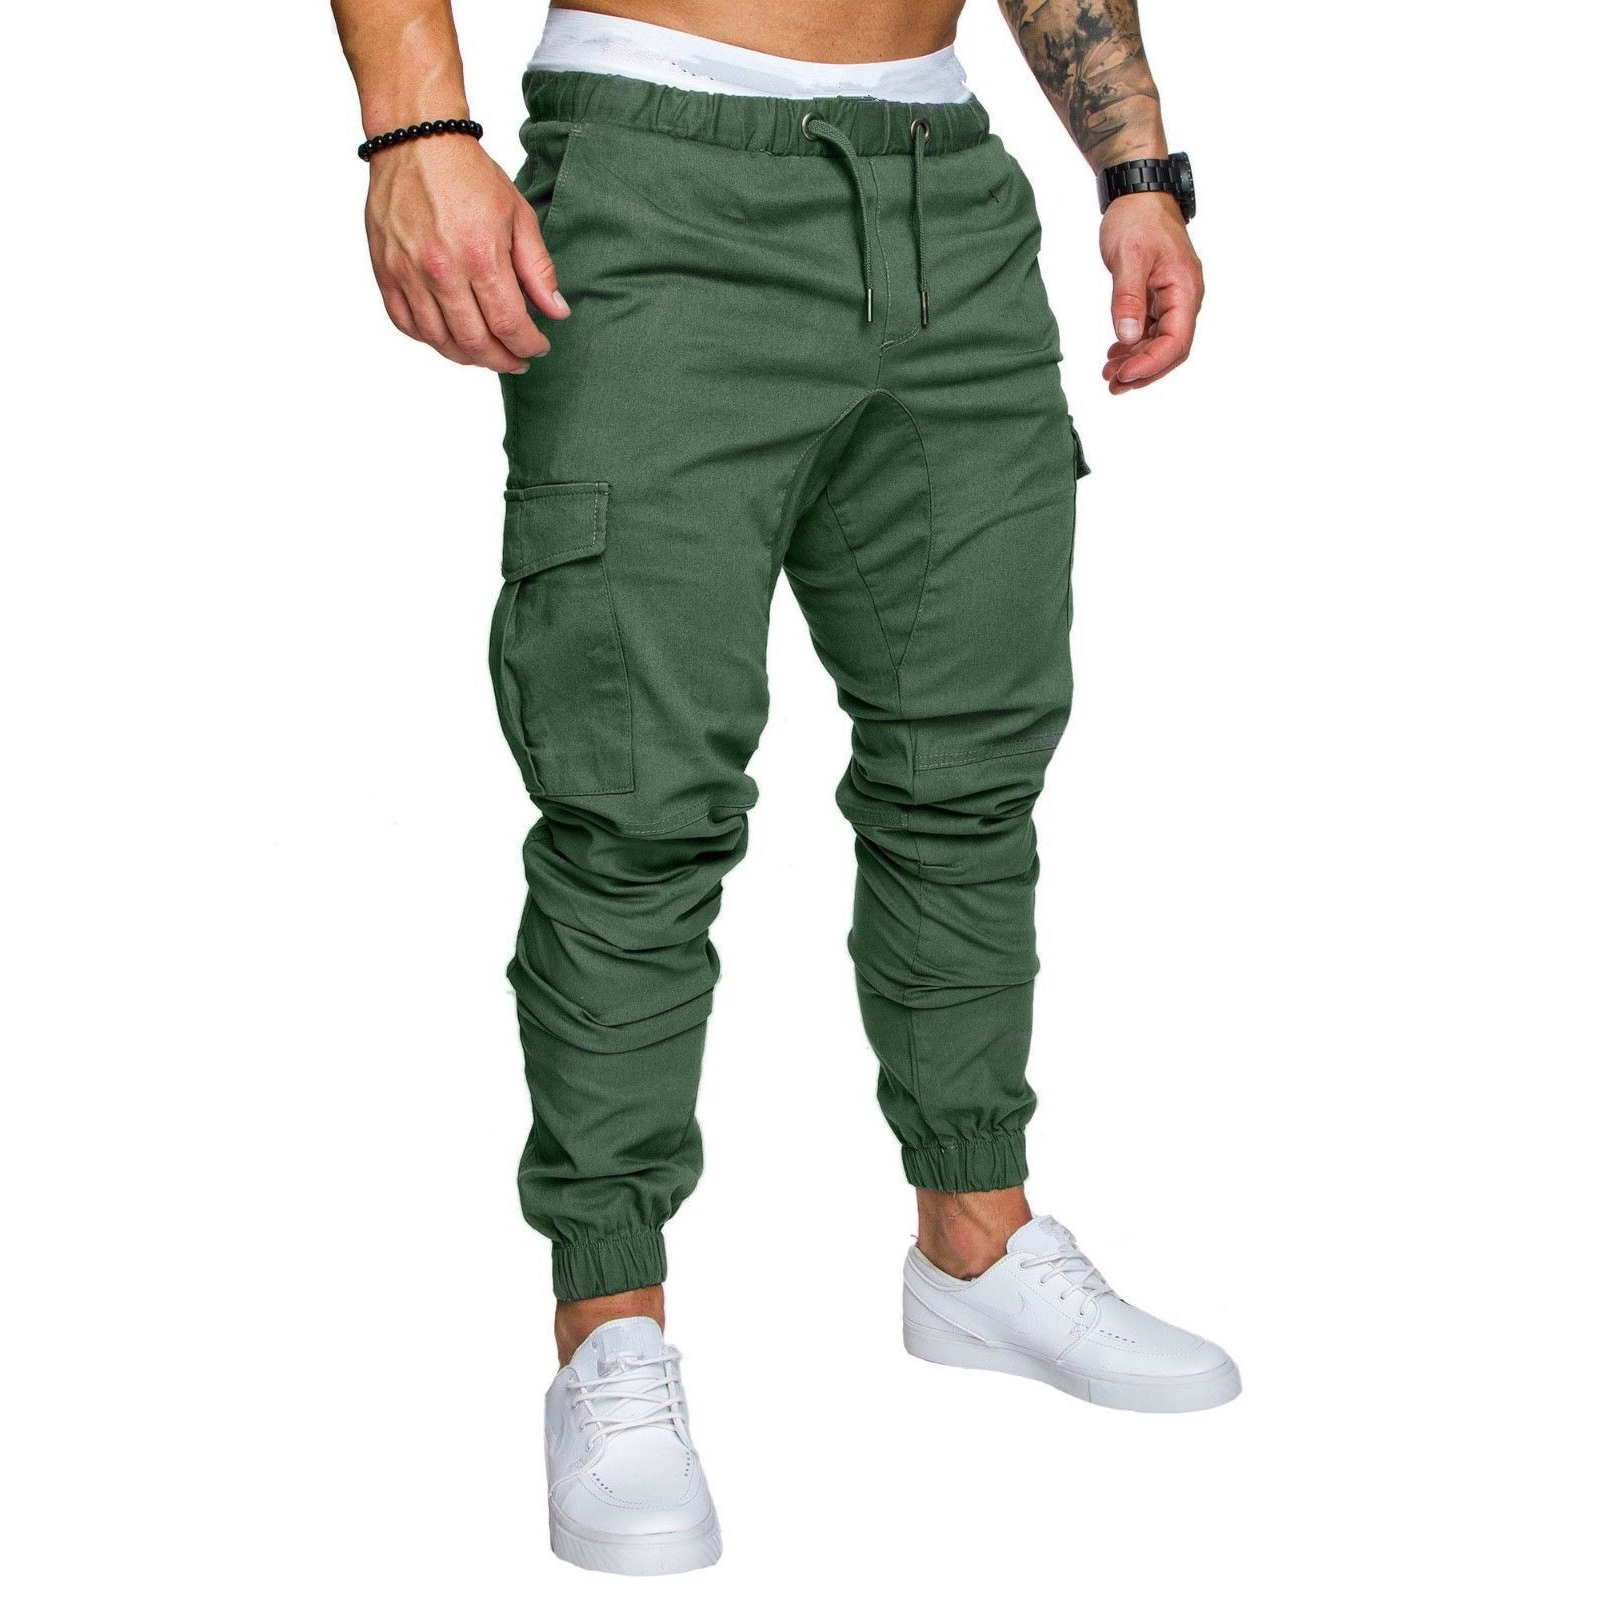 MRMT 2020 Brand New Men's Trousers Casual Fashion Elastic Pants Tether Pants for Male Solid Color Trouser